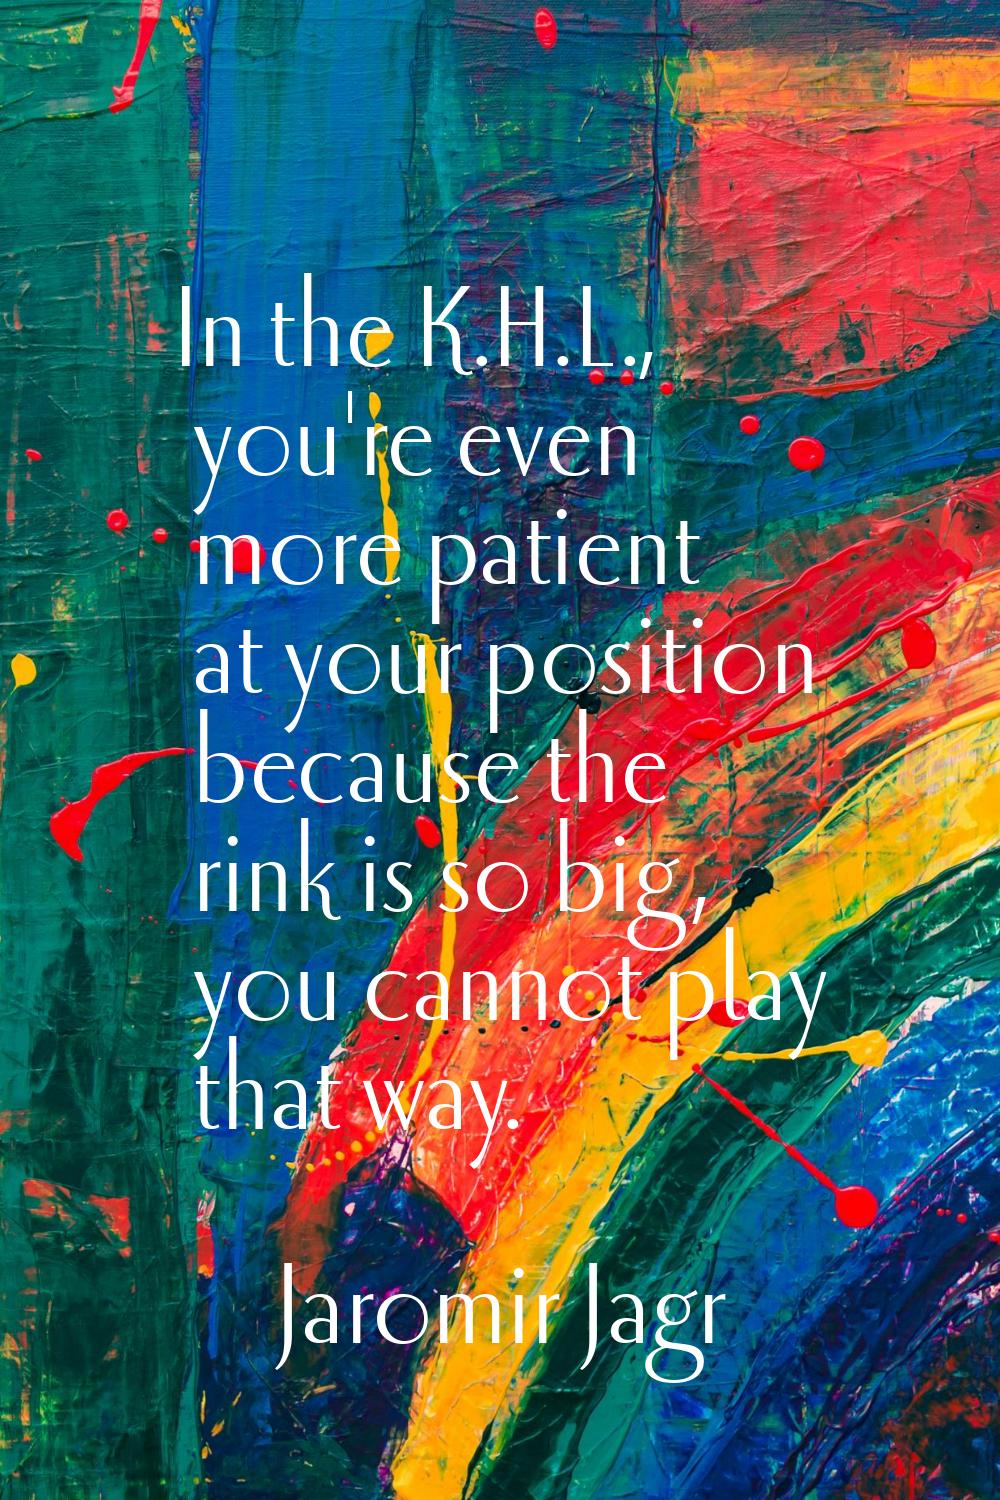 In the K.H.L., you're even more patient at your position because the rink is so big, you cannot pla